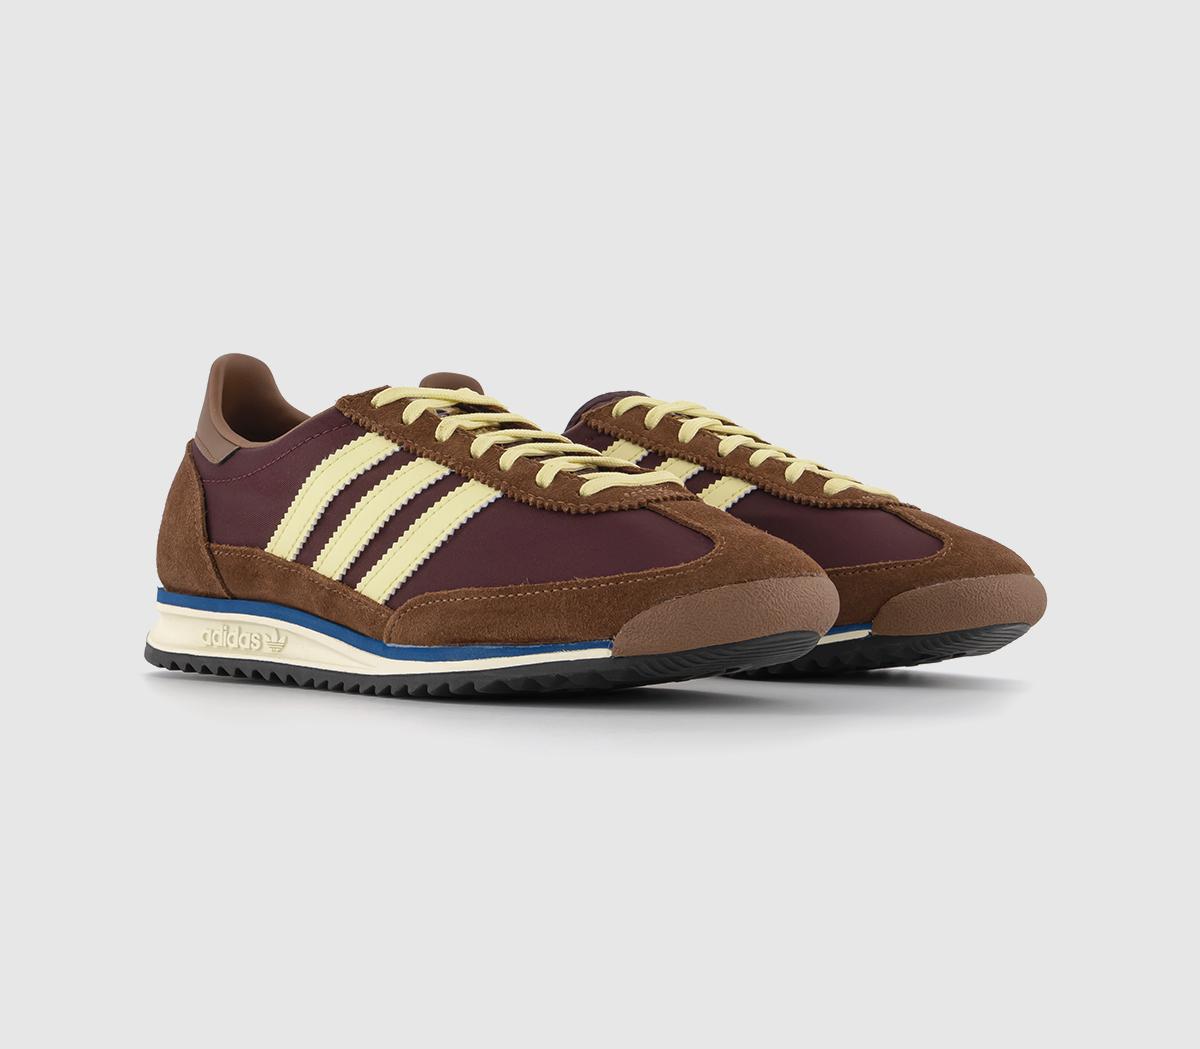 Adidas Womens SL 72 Trainers Maroon Almost Yellow Preloved Brown, 7